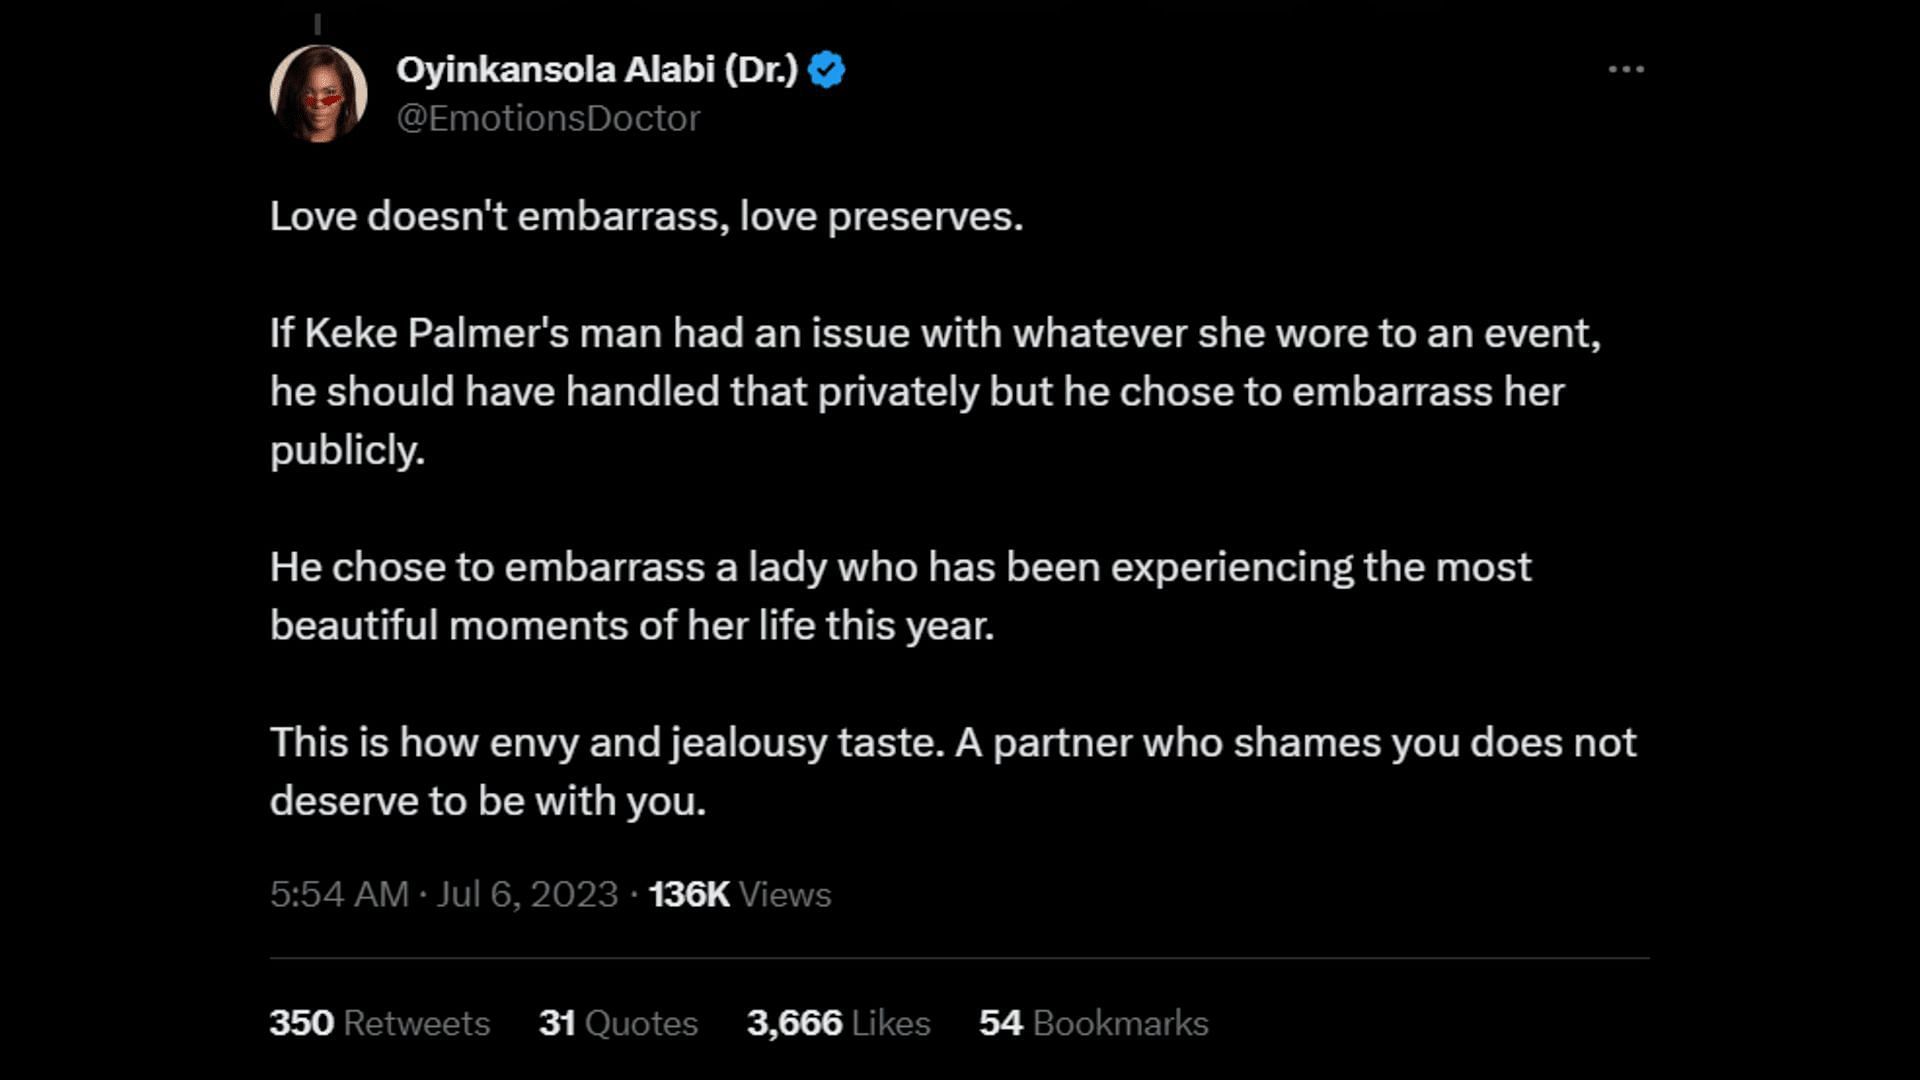 A tweet clarifying how a partner who shames you publicly does not deserve to be with you in reference to the Palmer-Jackson issue. (Image via Twitter/Oyinkansola Alabi (Dr.)